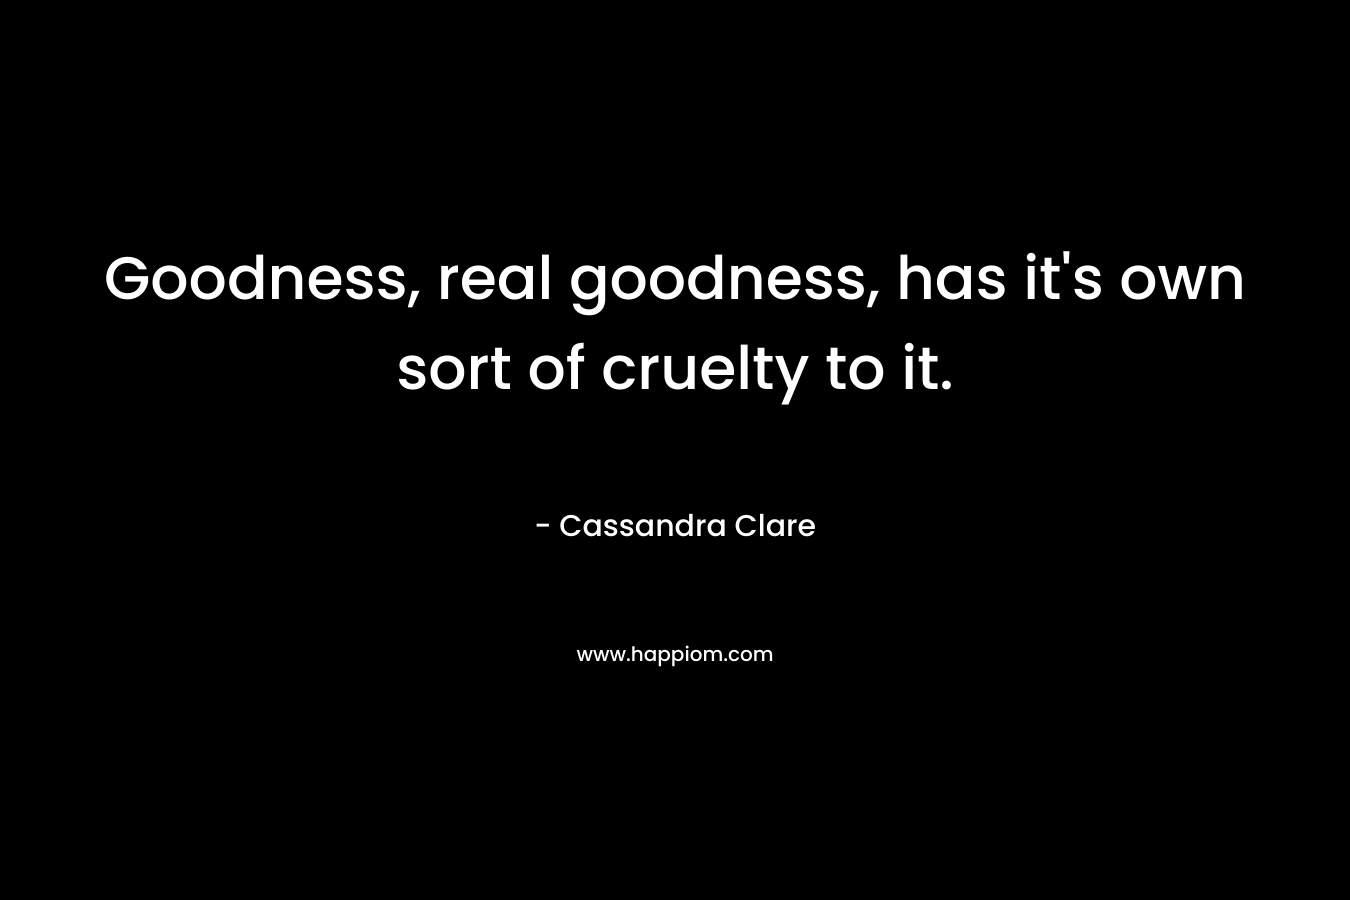 Goodness, real goodness, has it’s own sort of cruelty to it. – Cassandra Clare